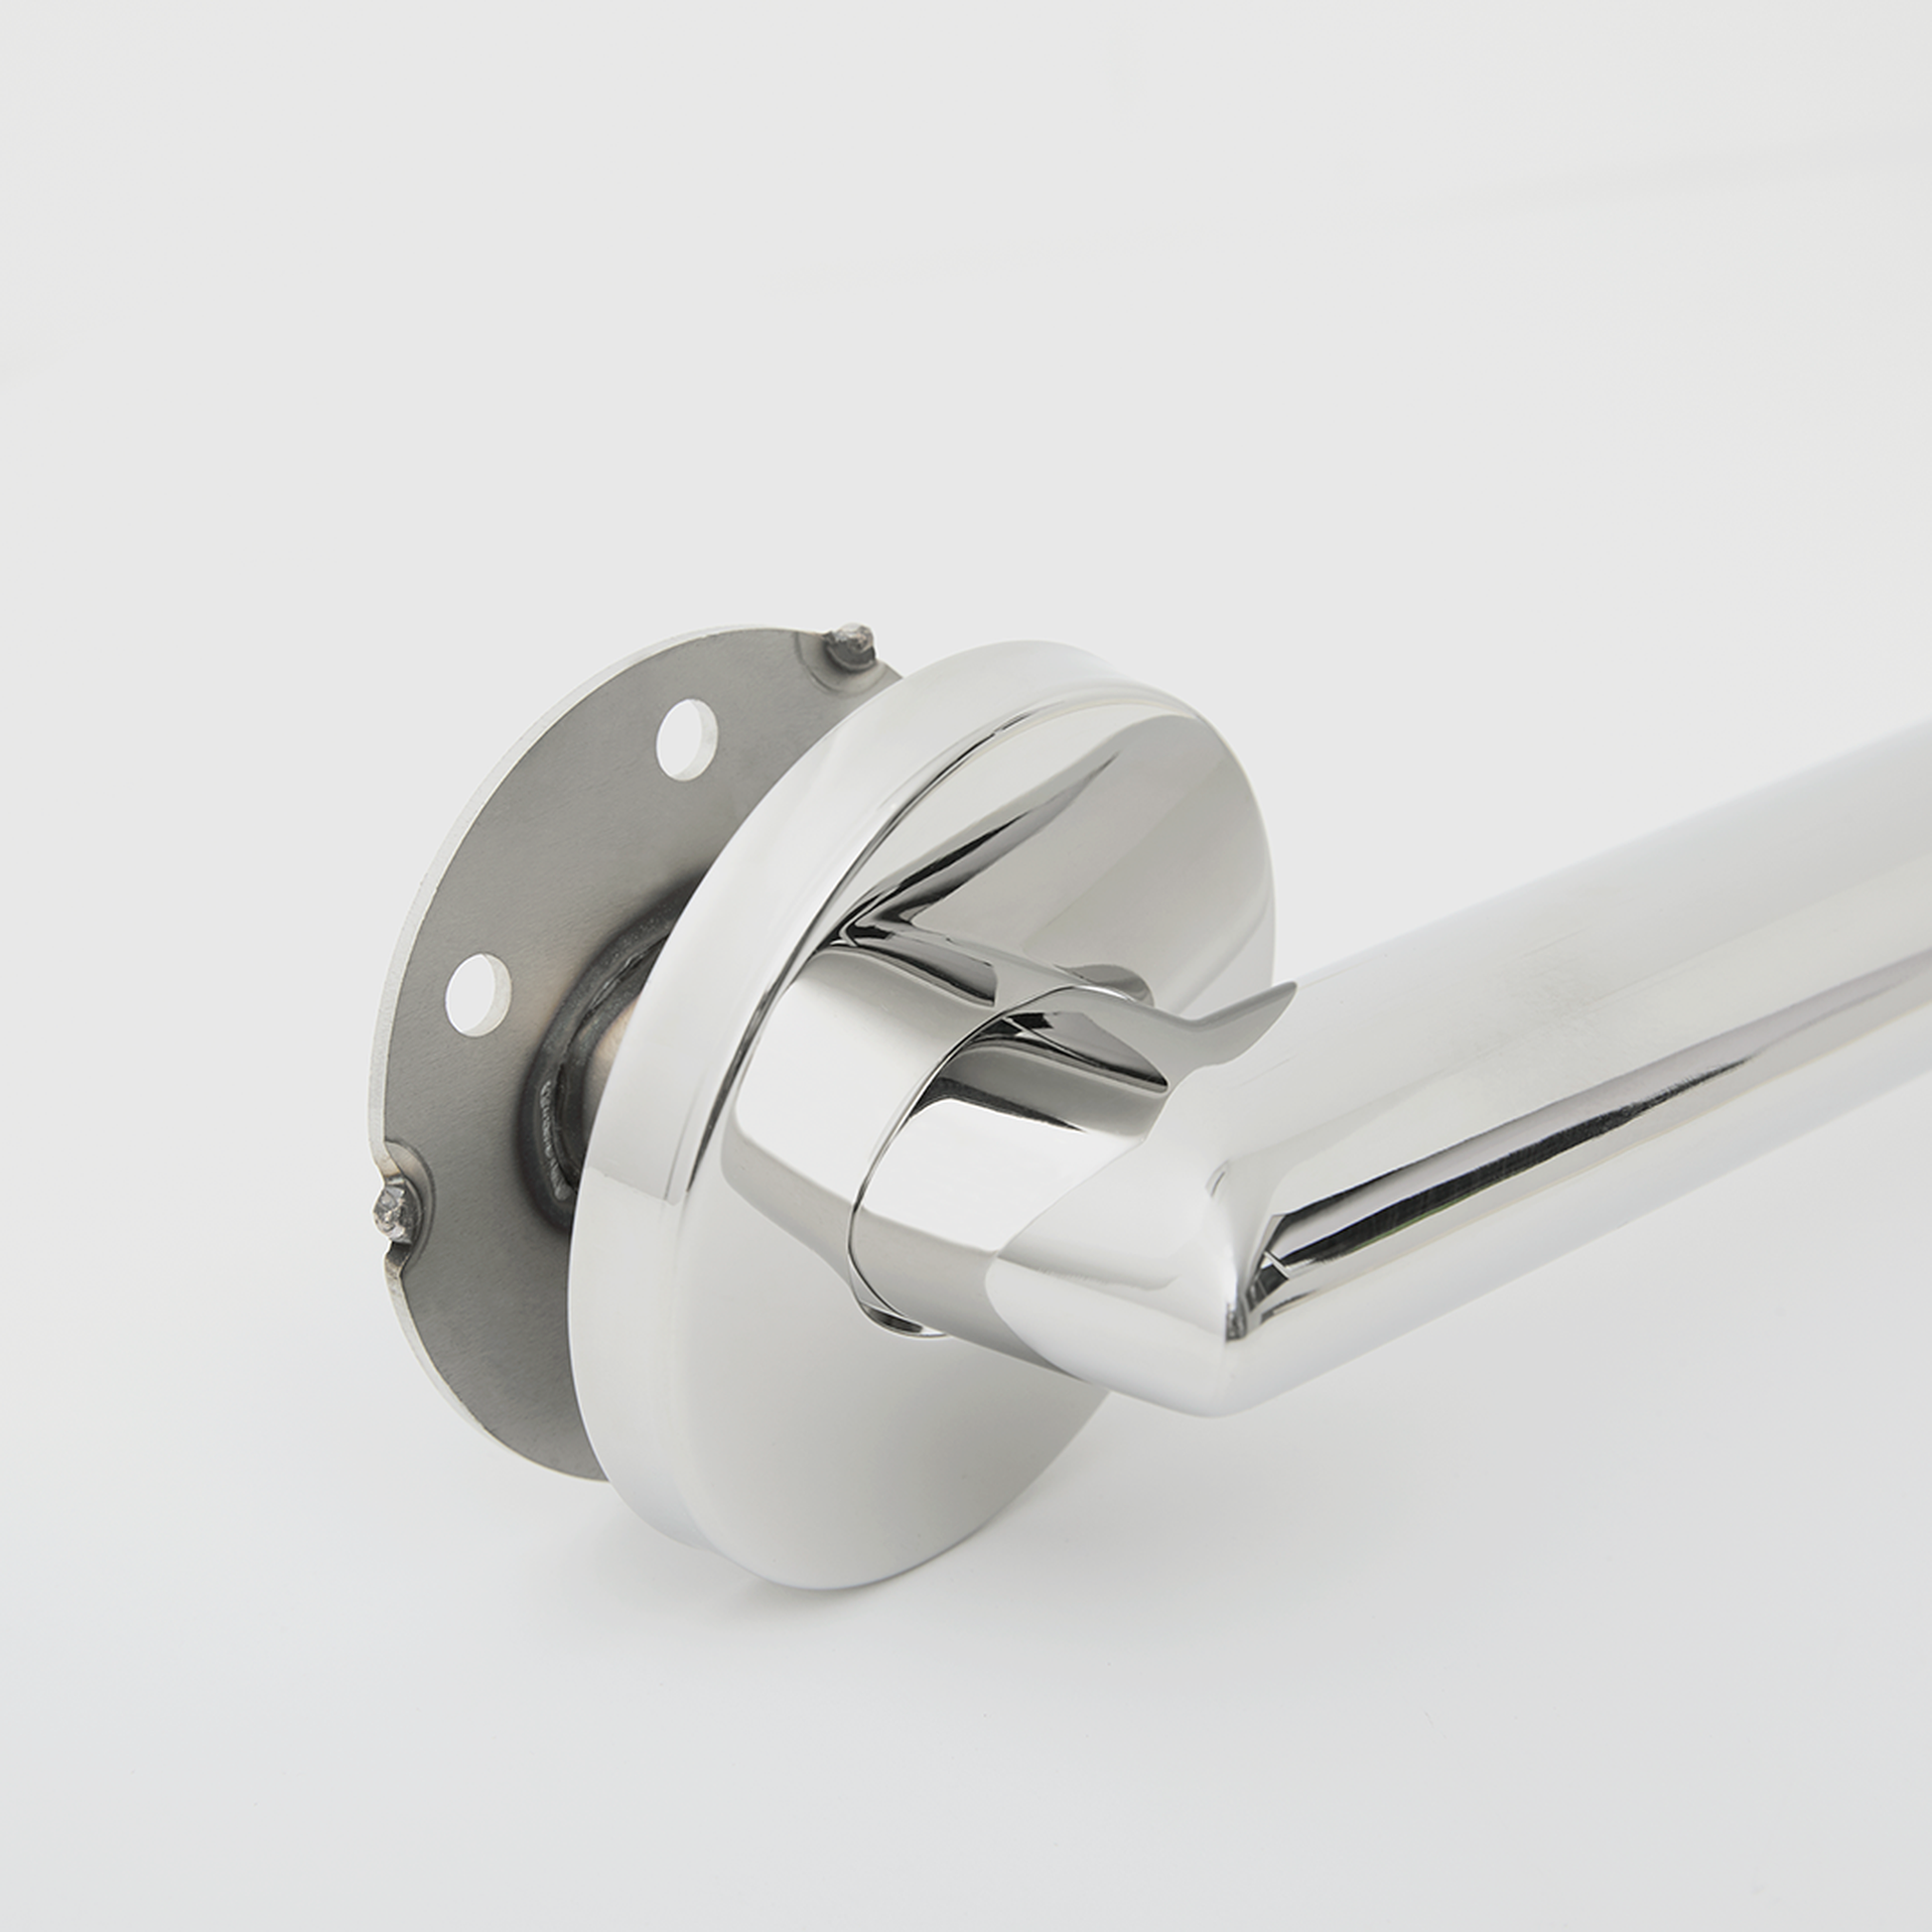 Seachrome Coronado 48" Satin Satinless Steel 1.5" Concealed Flanges Oval Grab Bar With Mitered Corners